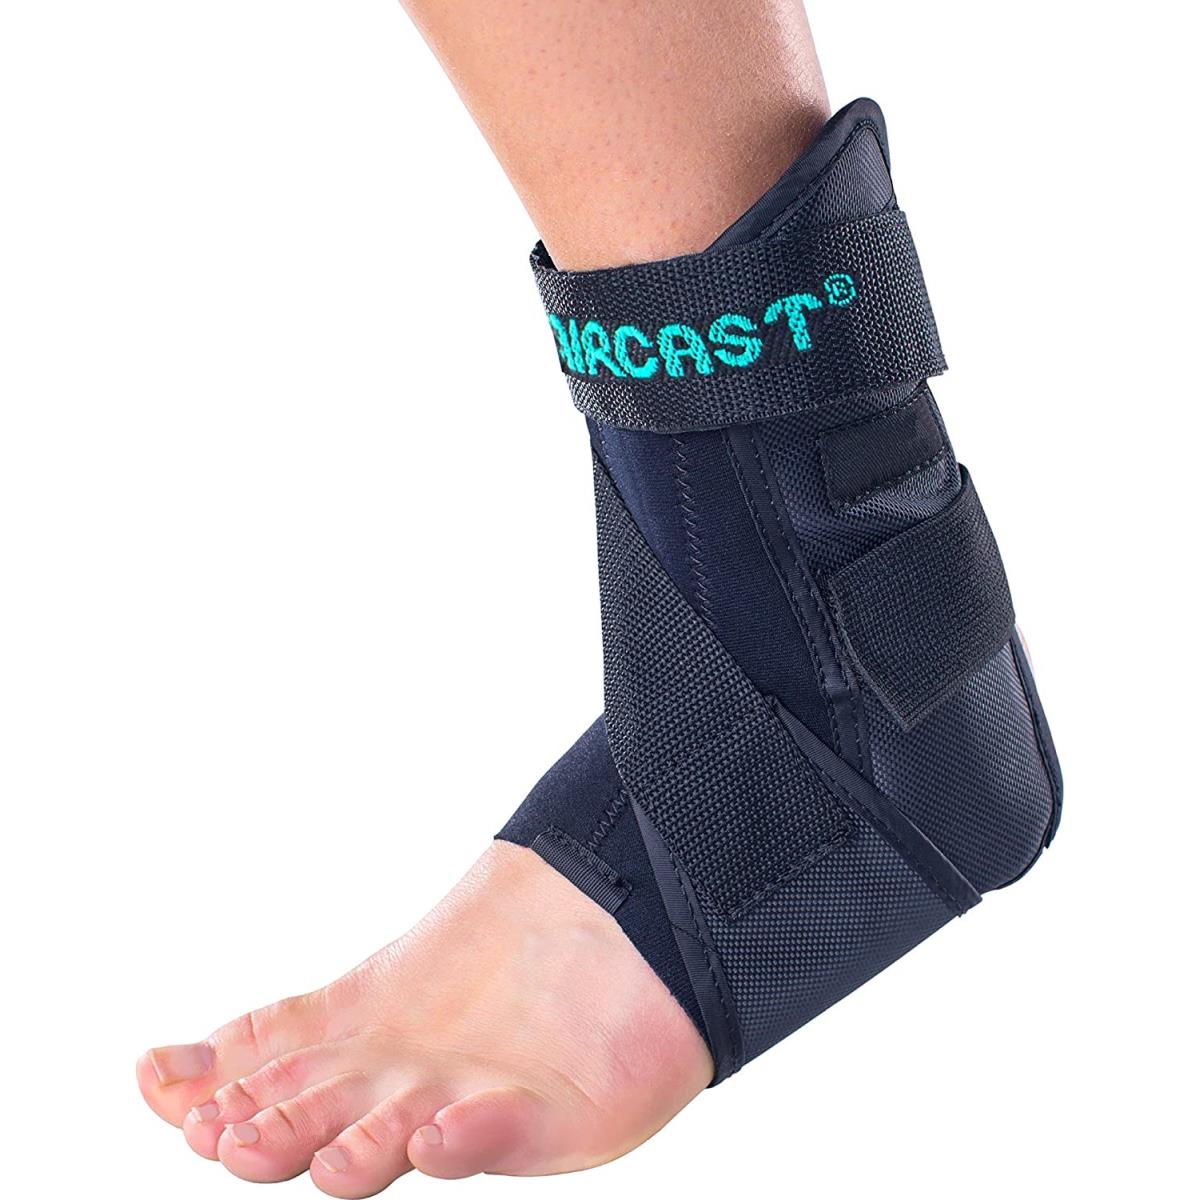 Donjoy Aircast Airsport Ankle Support Brace Left Foot Small